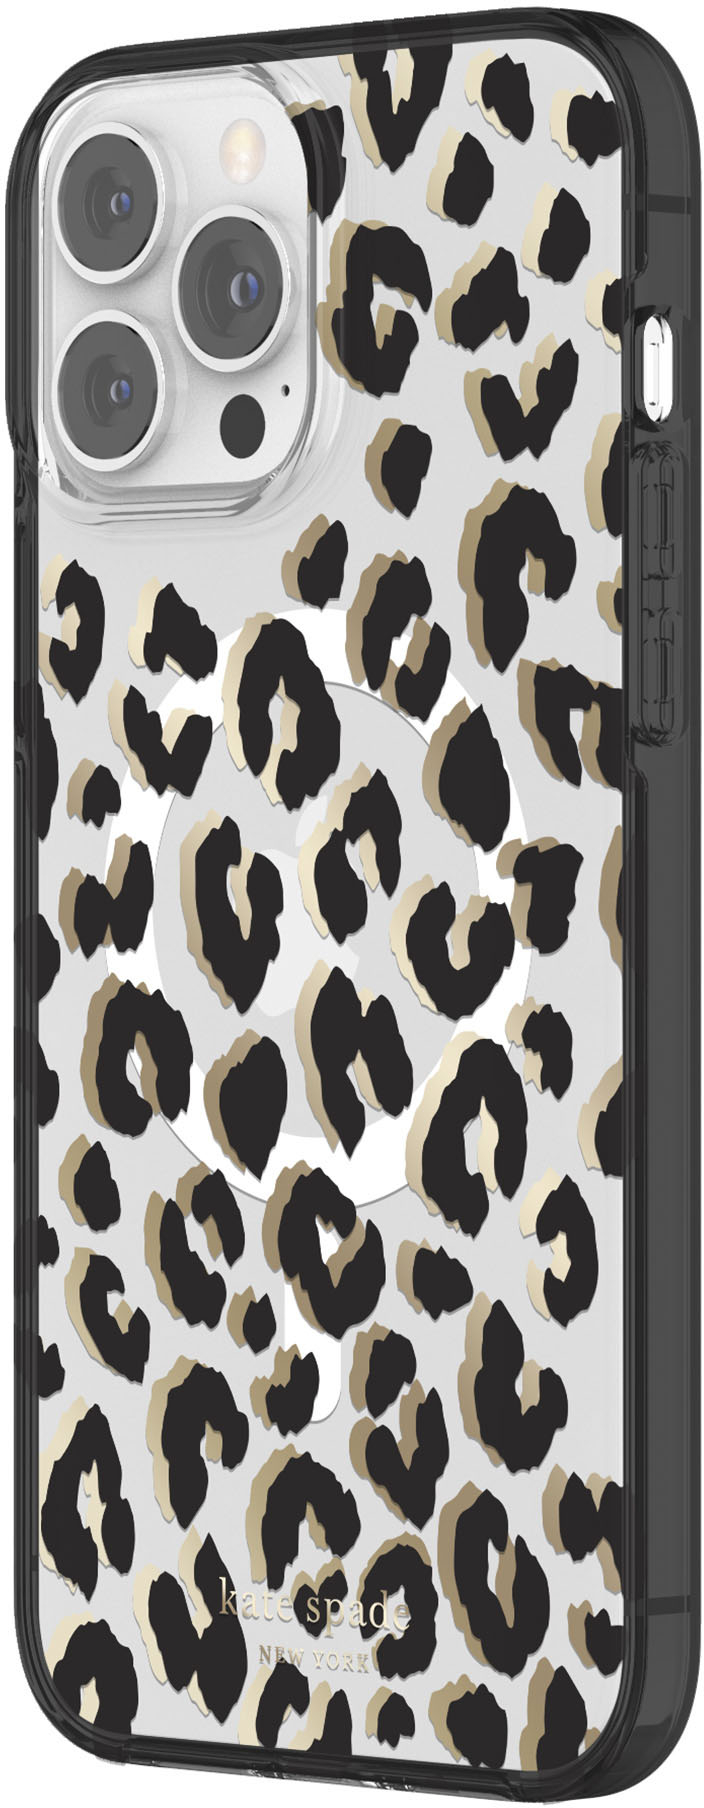 Angle View: kate spade new york - Folio Case for Apple iPhone 12 & iPhone 12 Pro - Pale Vellum Crumbs